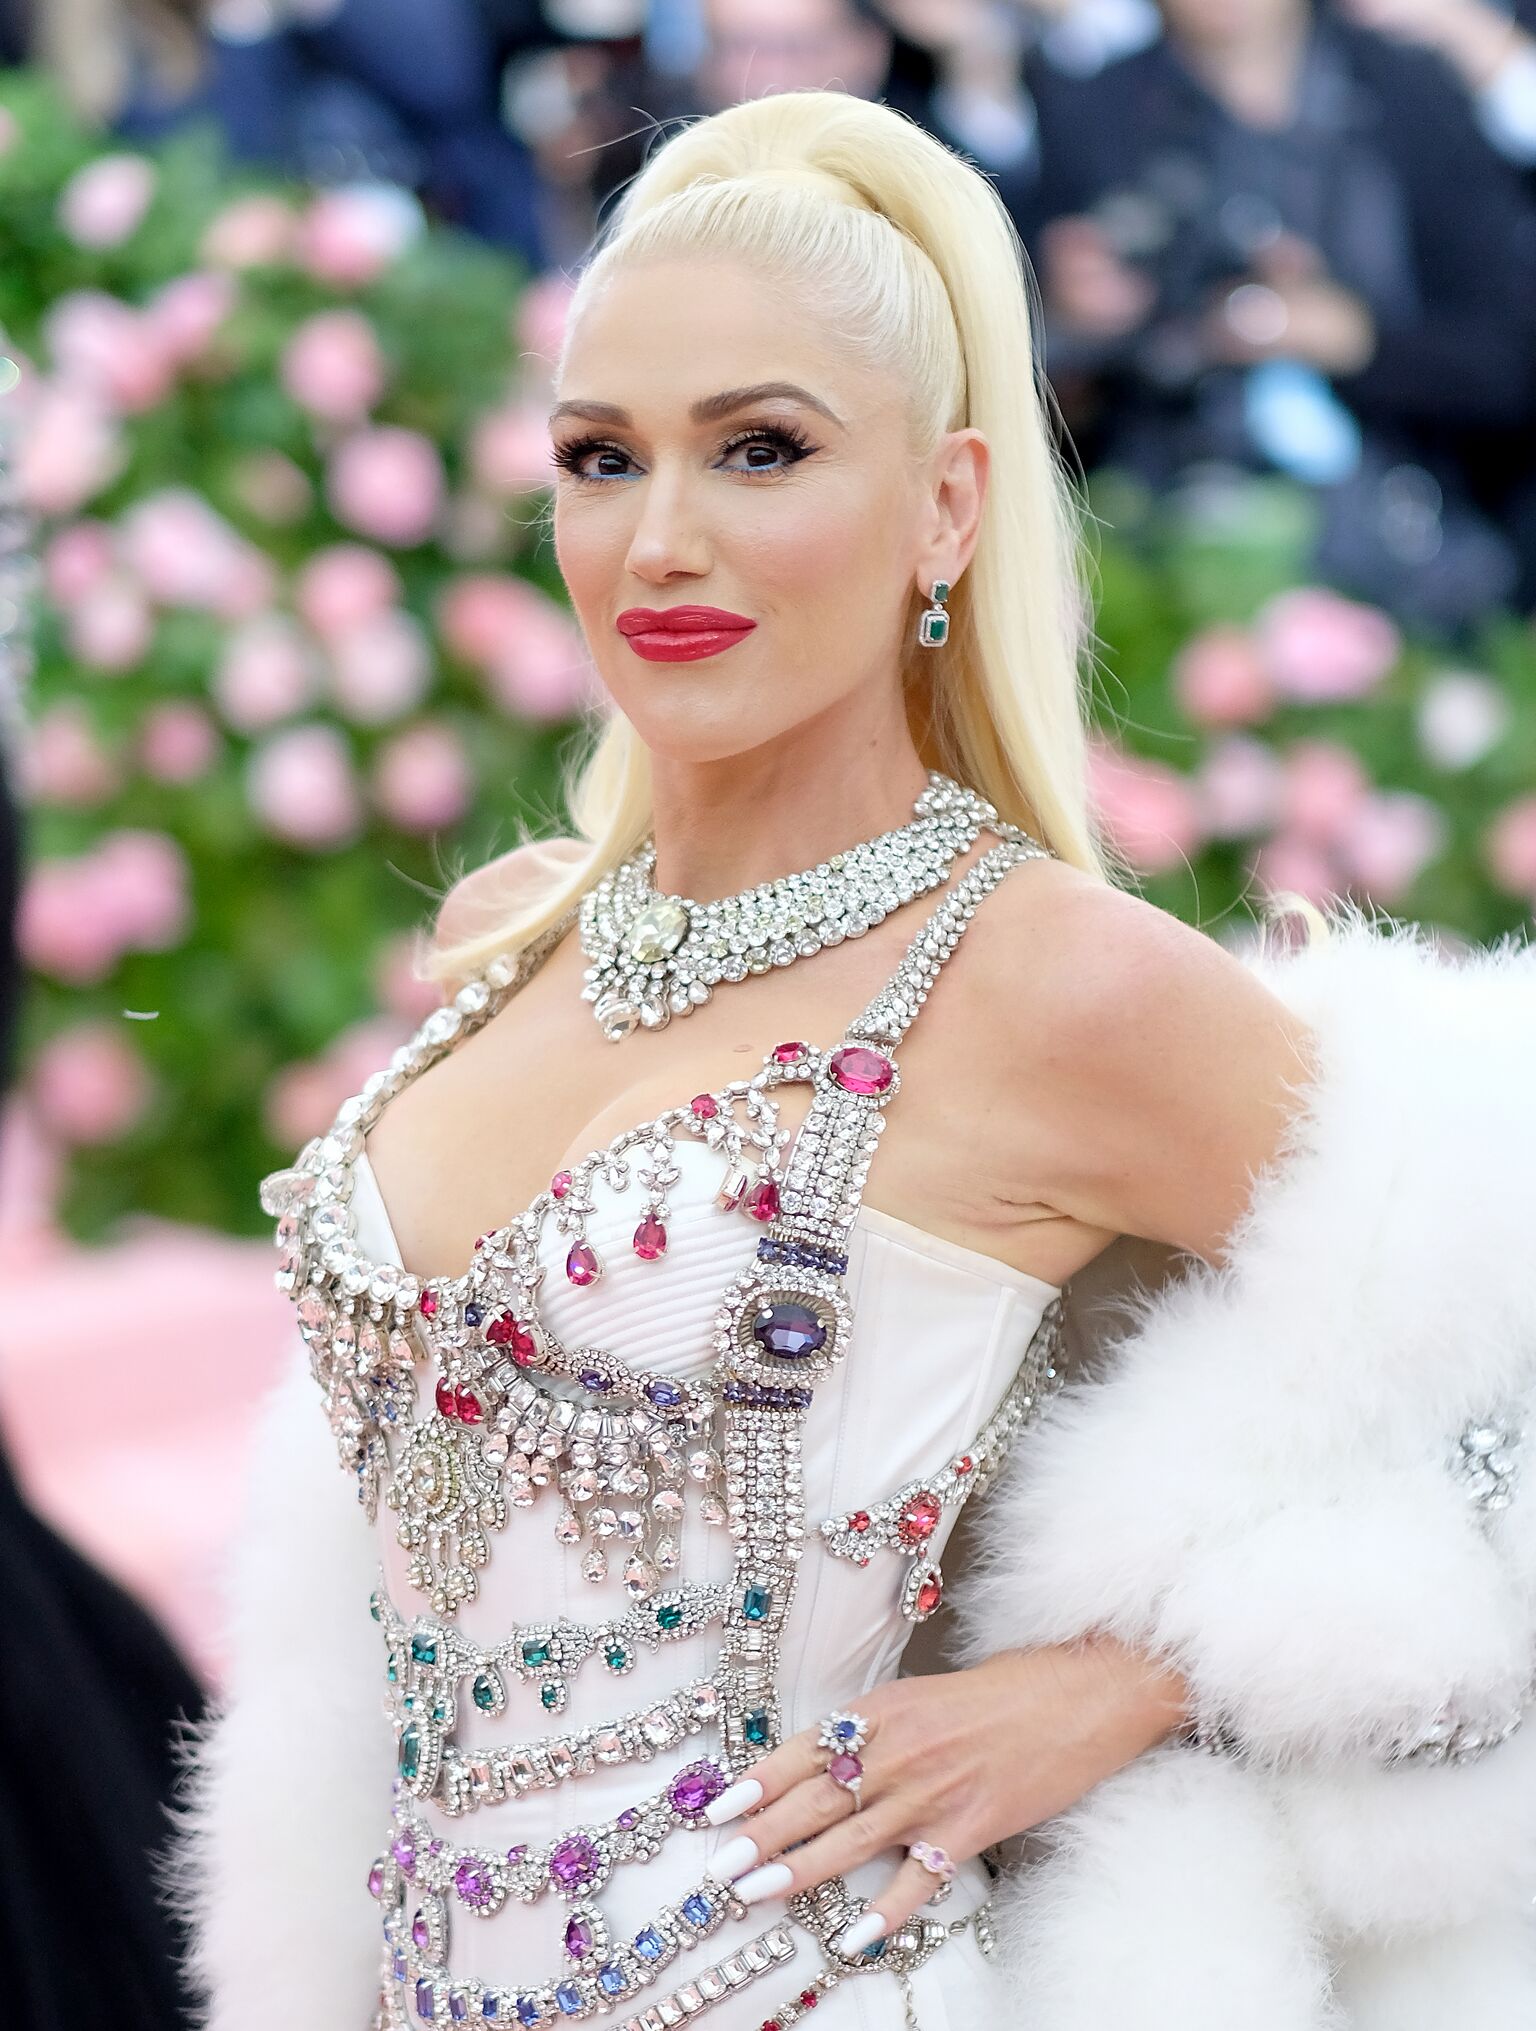 Gwen Stefani photos then and now: No Doubt's Tragic Kingdom was released 20 years ago - Business ...